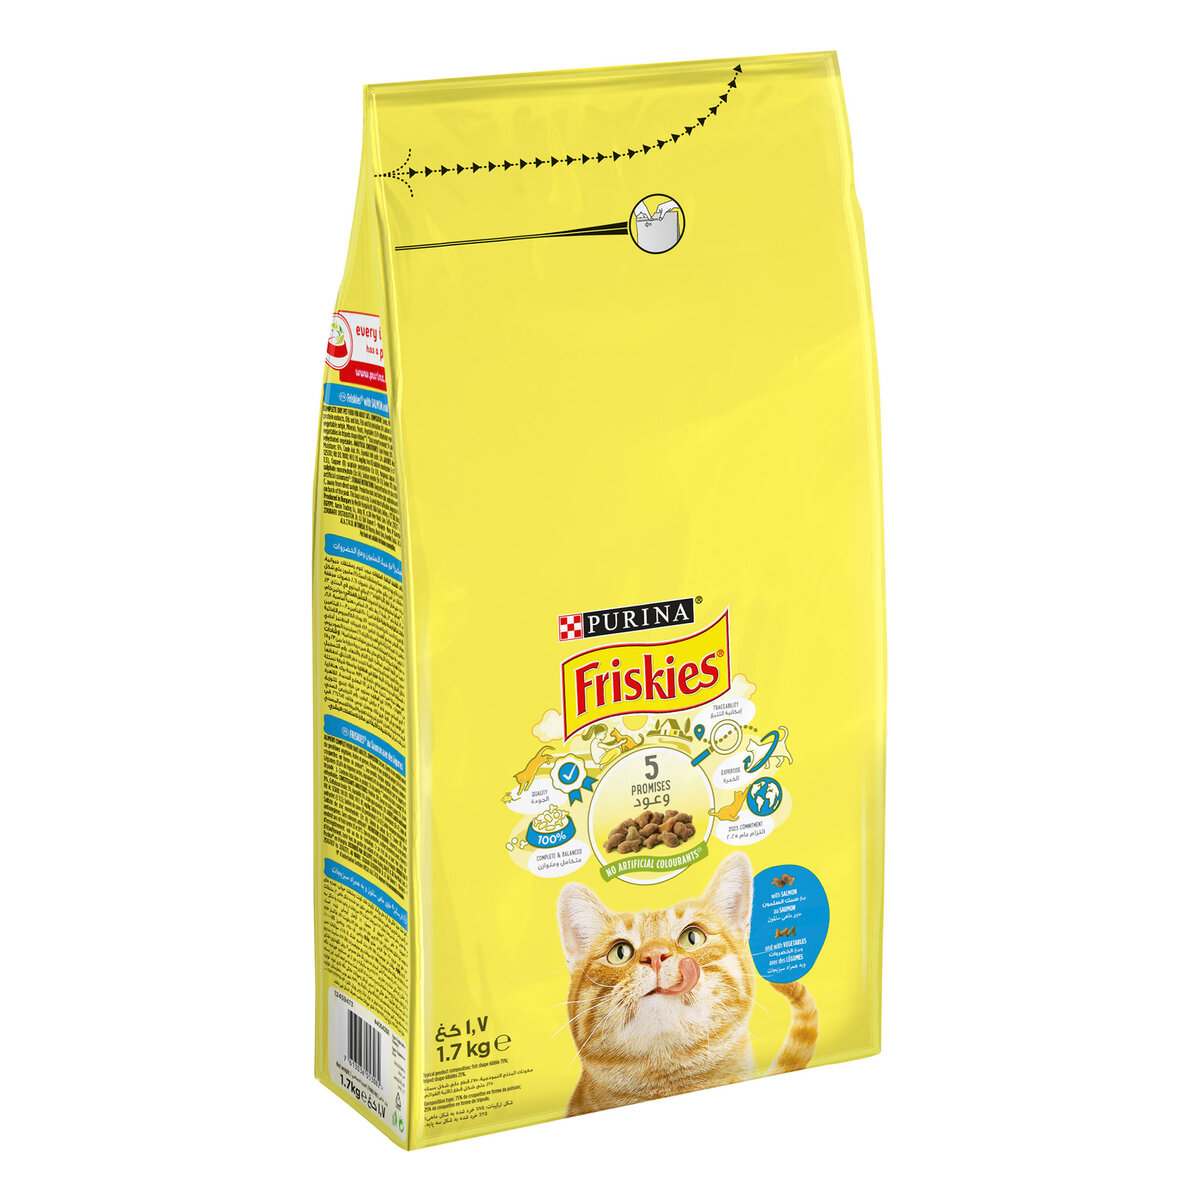 Purina Friskies Cat Food With Salmon And Vegetables 1.7 kg